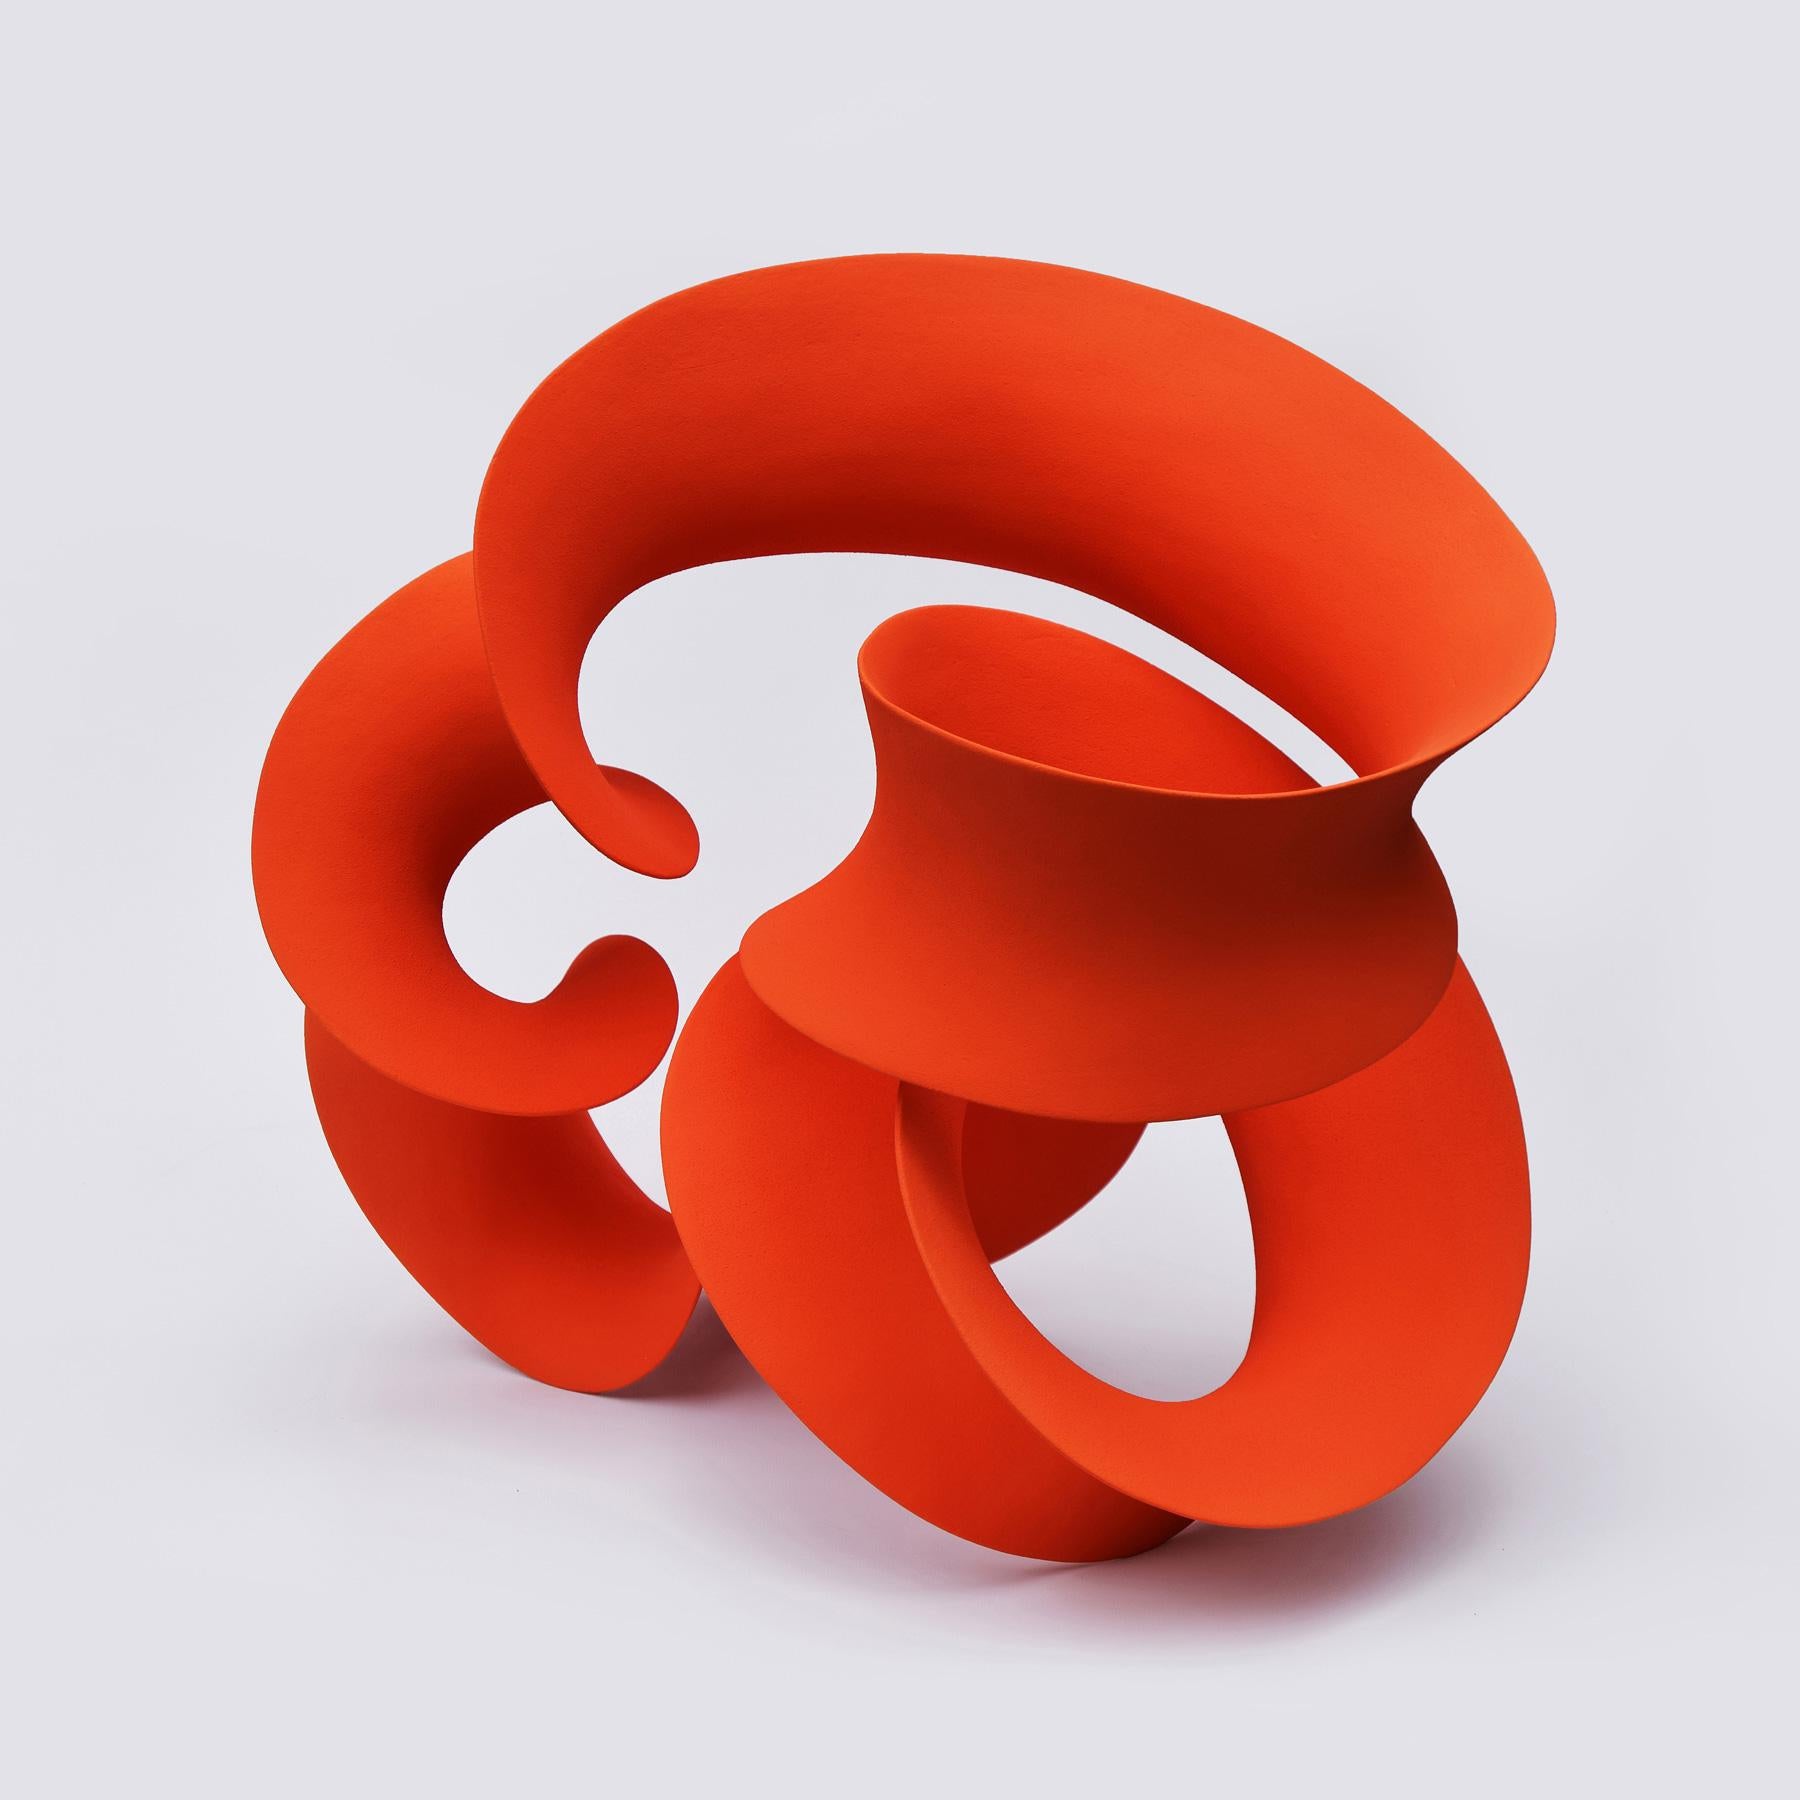 English Orange Continuous Form by Merete Rasmussen